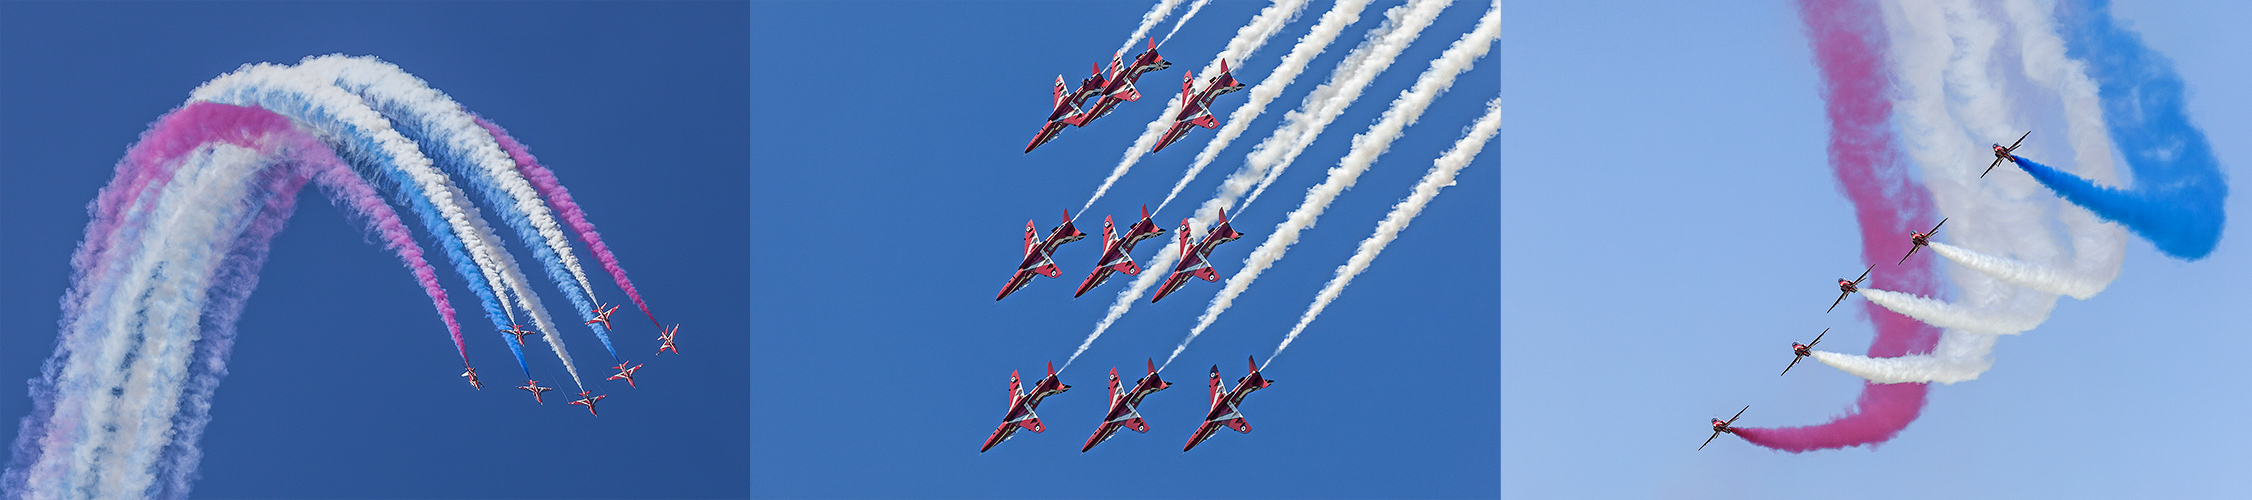 THE RED ARROWS - RAF